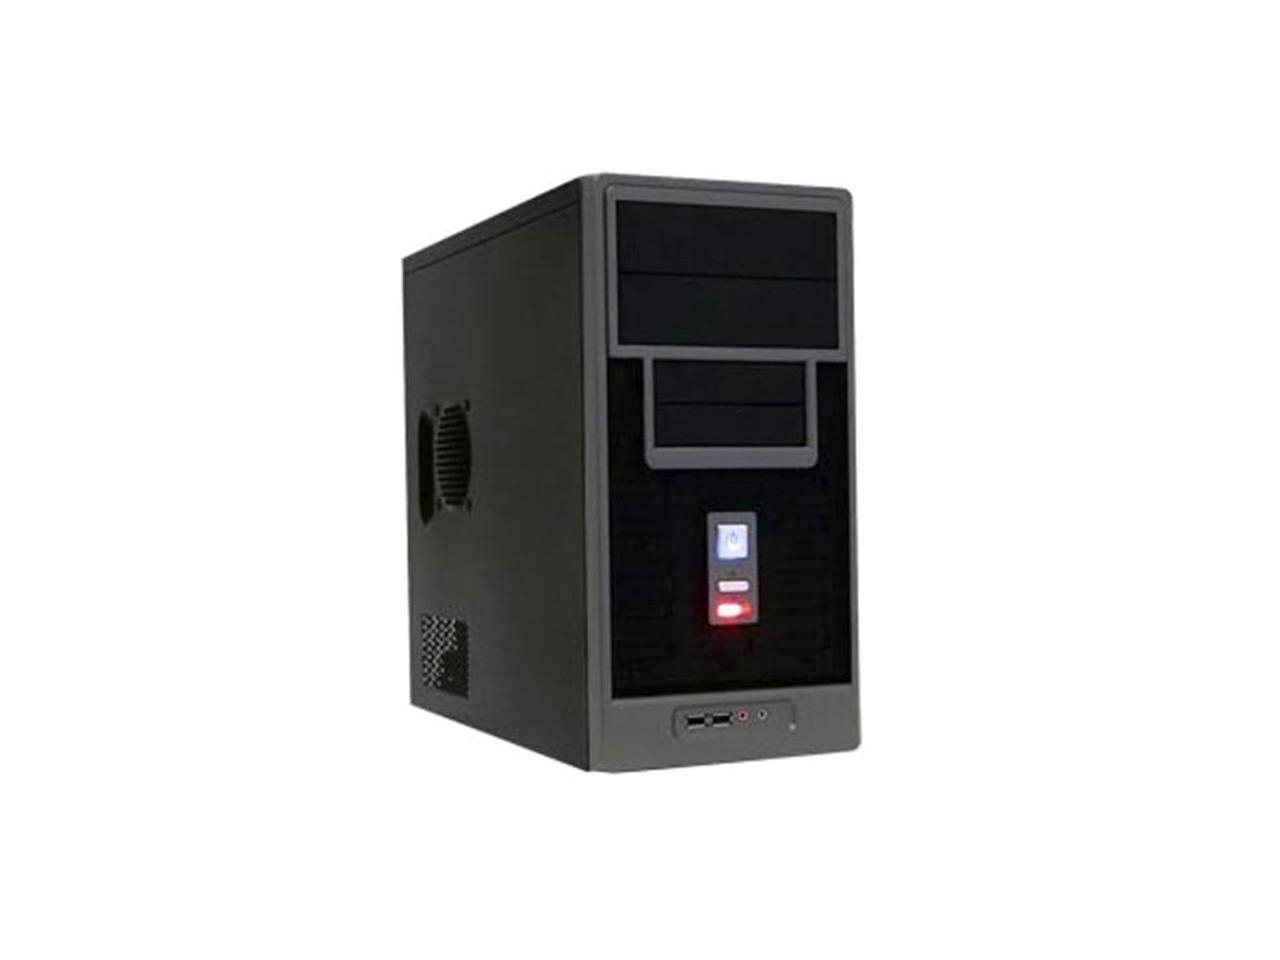 Details About Apex Tm 366 Bk Black Micro Atx Mini Tower Computer Case With 300w Power Supply throughout measurements 1280 X 960